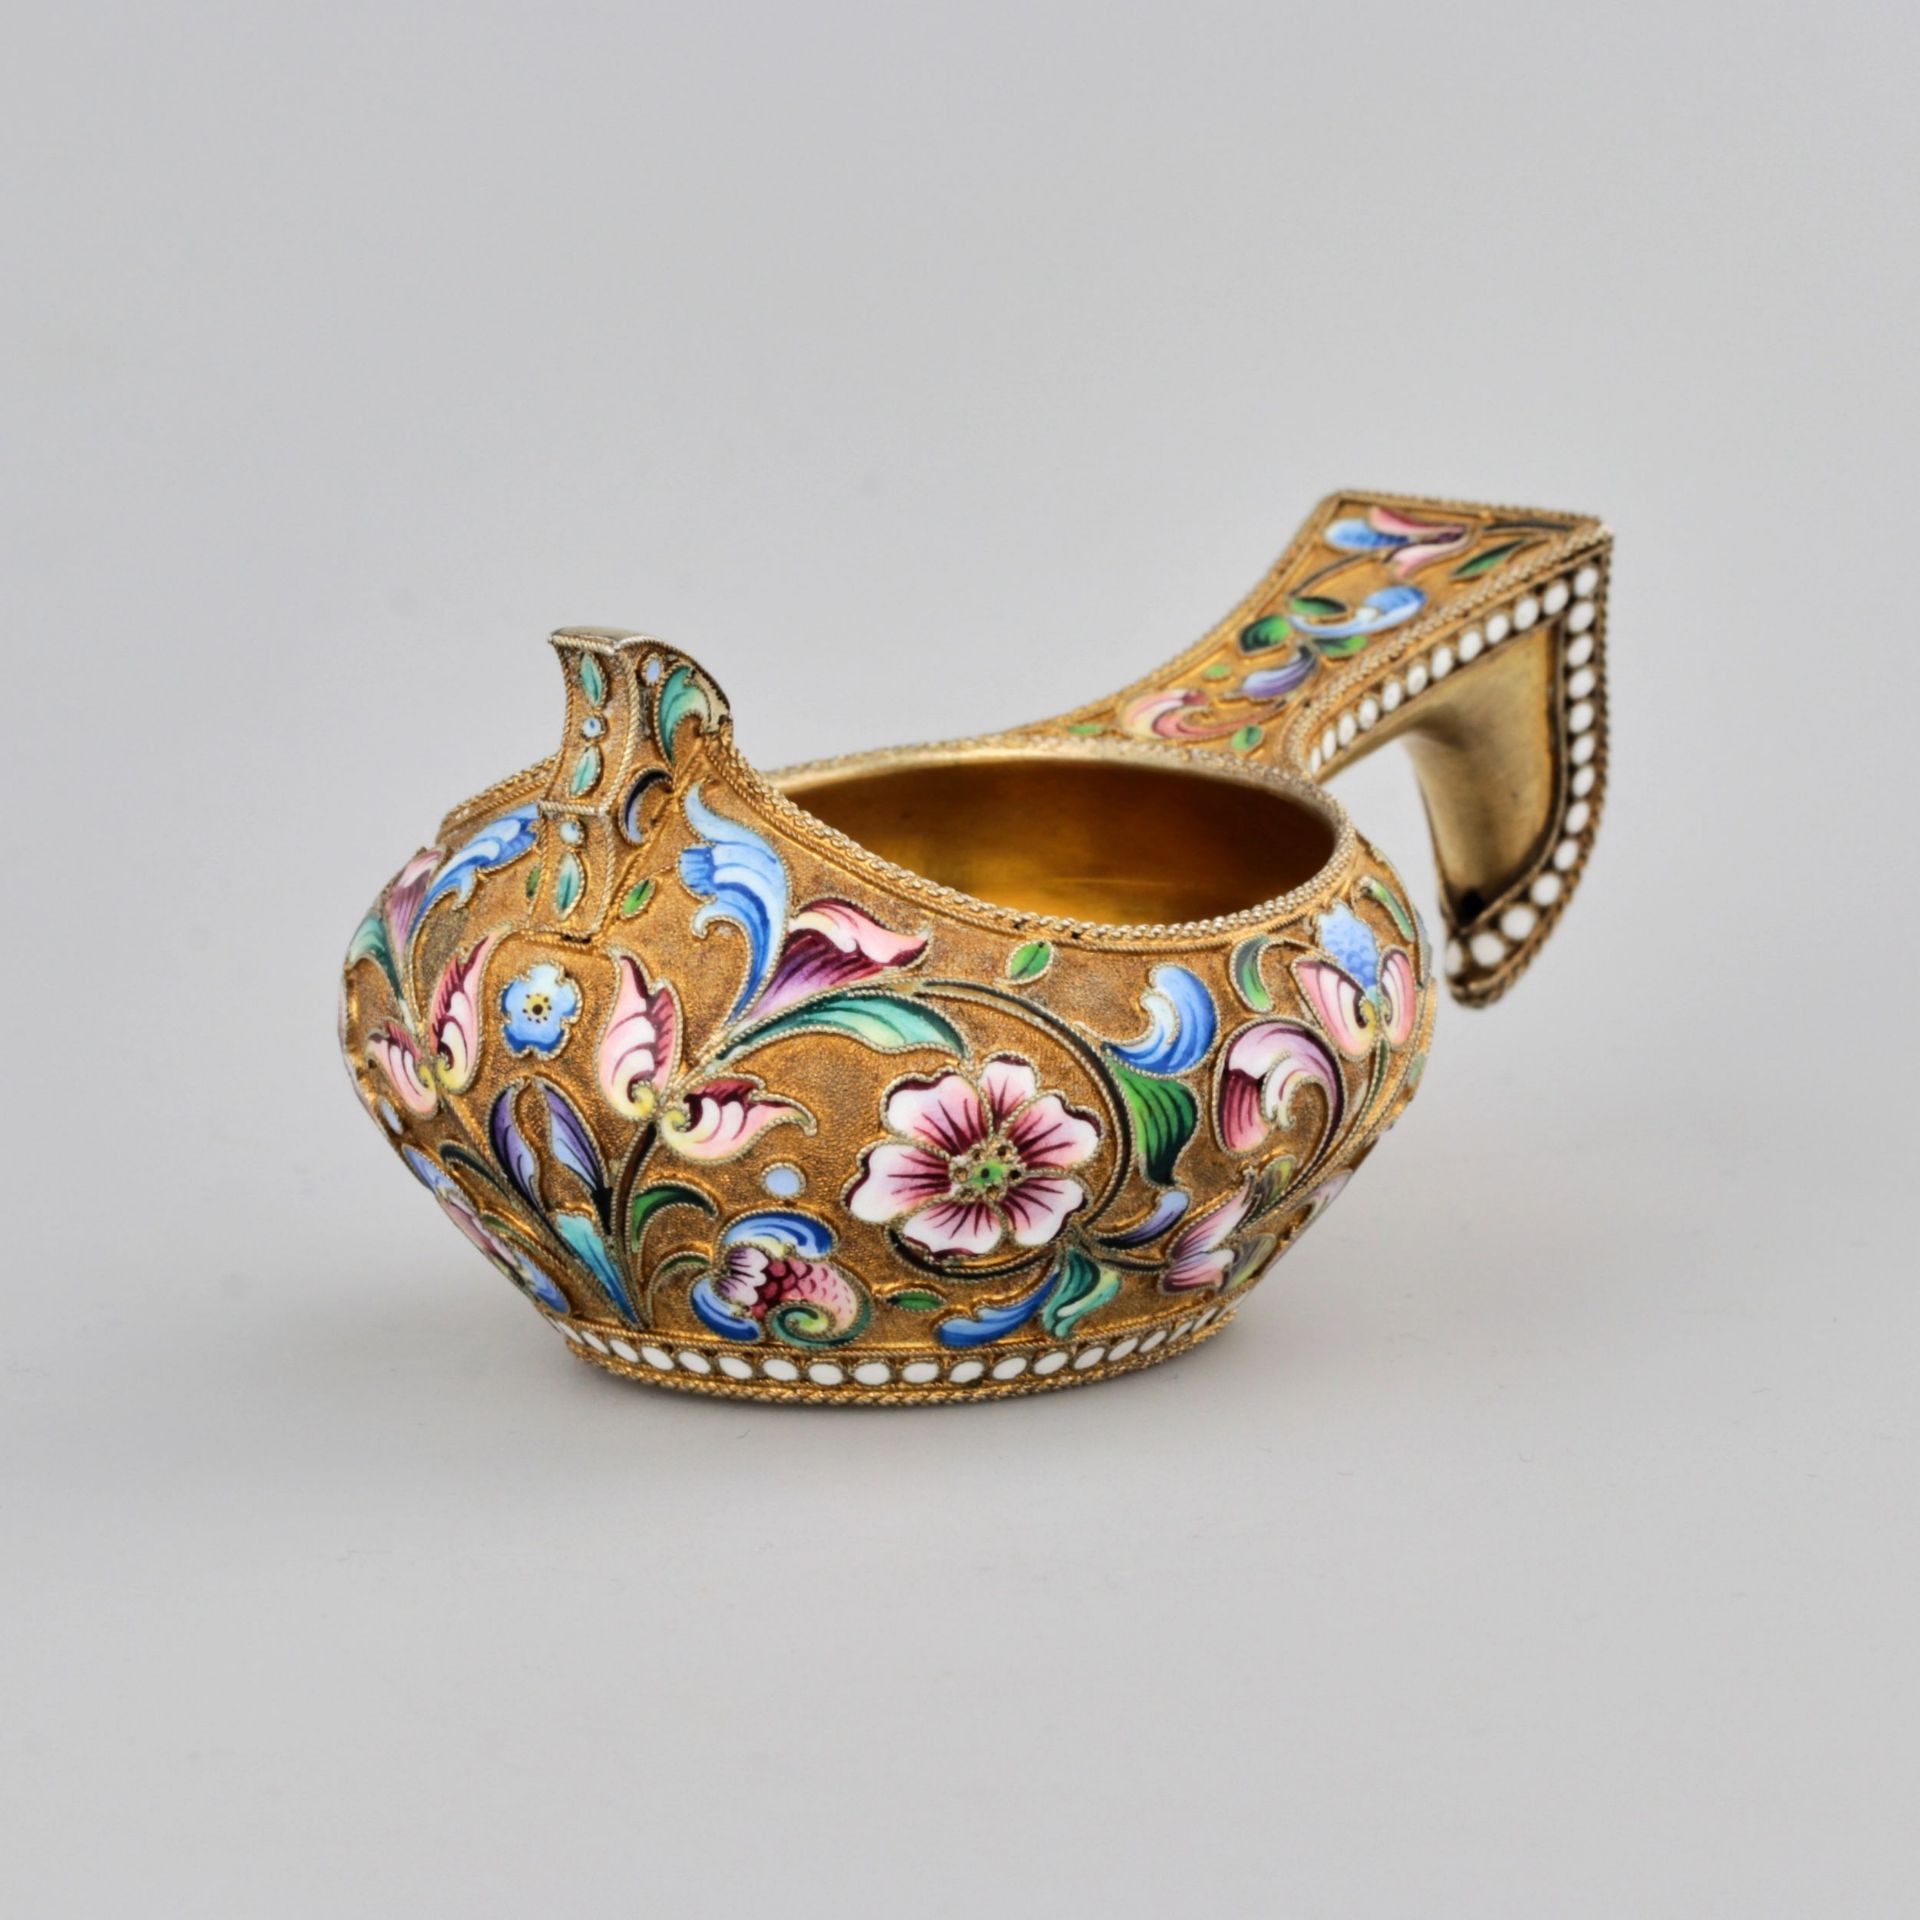 Decorative kovsh in Russian style with enamel. - Image 2 of 7